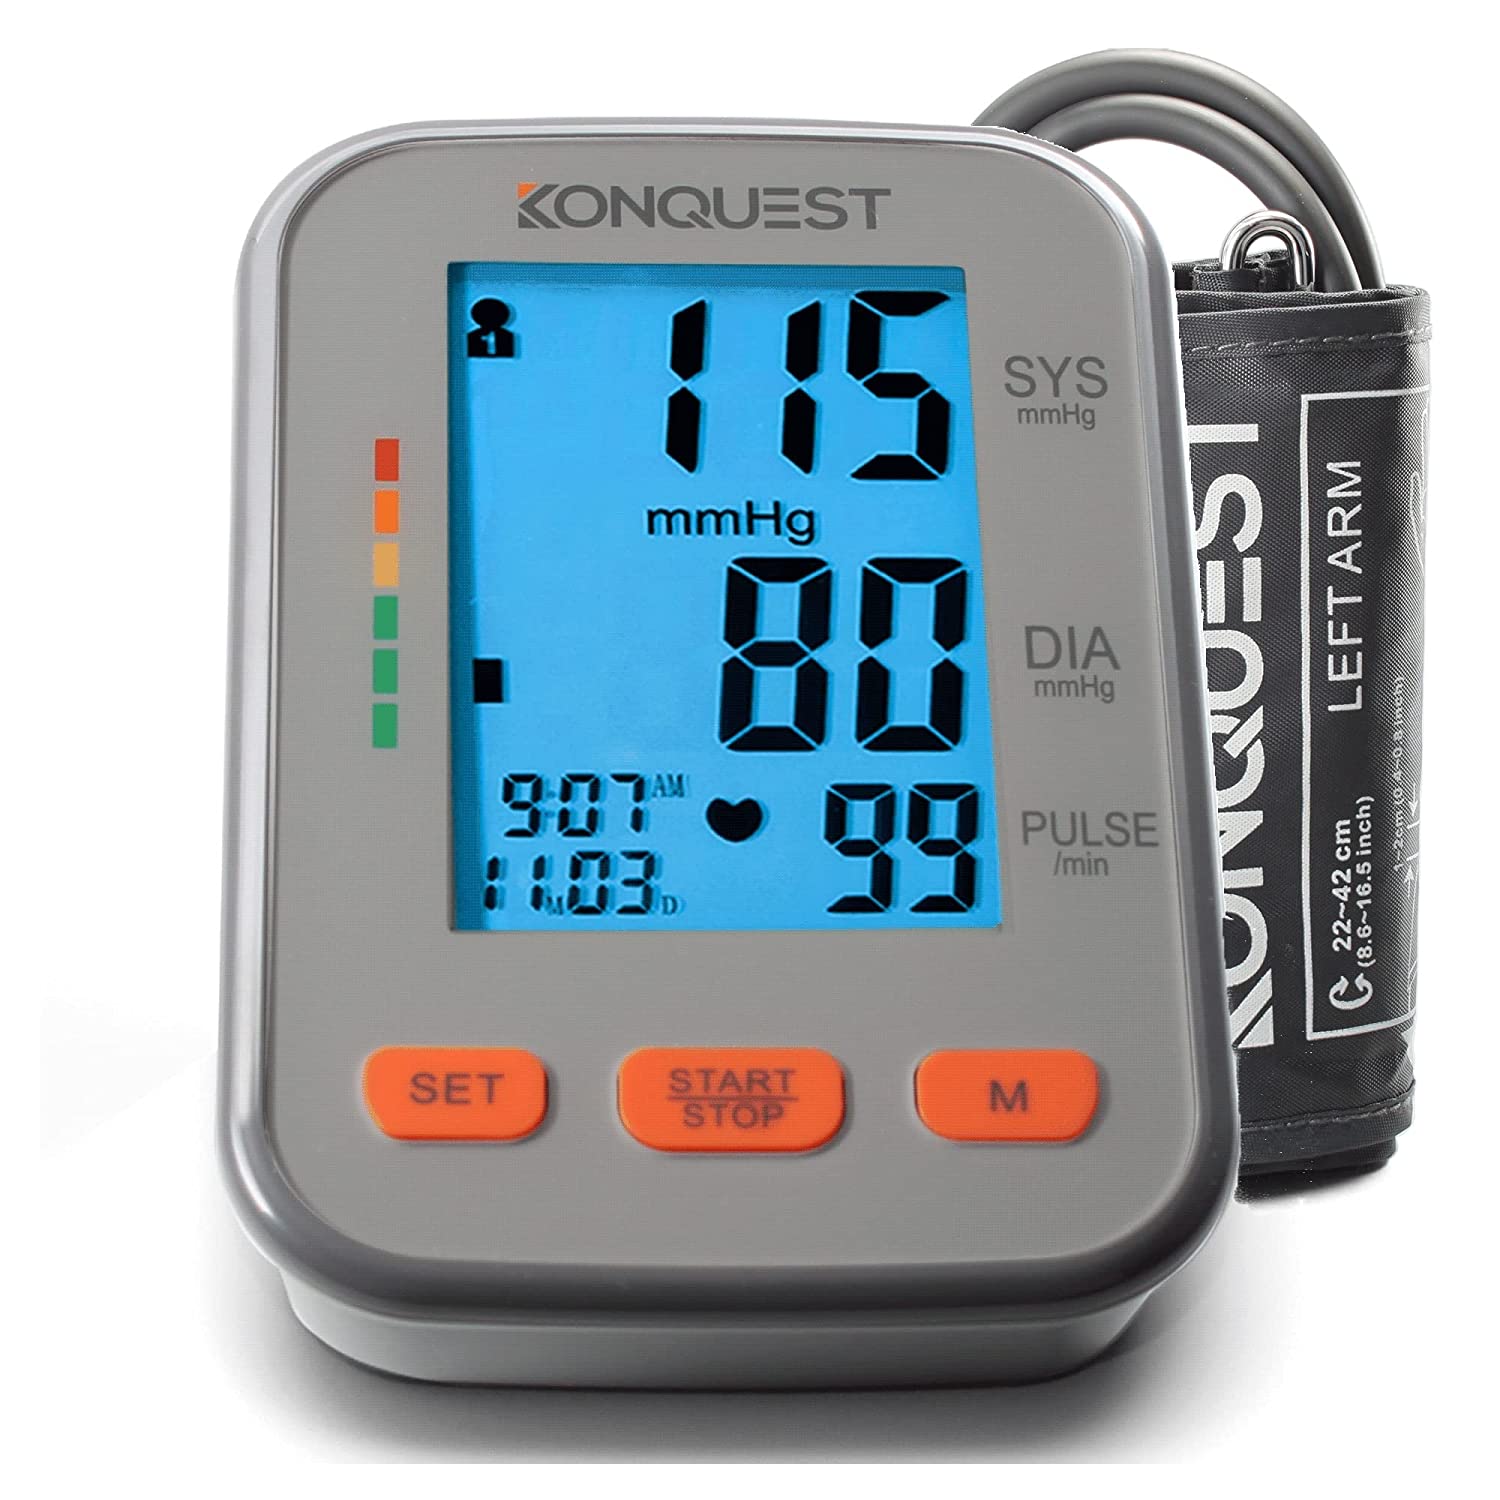 Review of Konquest KBP-2704A Automatic Upper Arm Blood Pressure Monitor